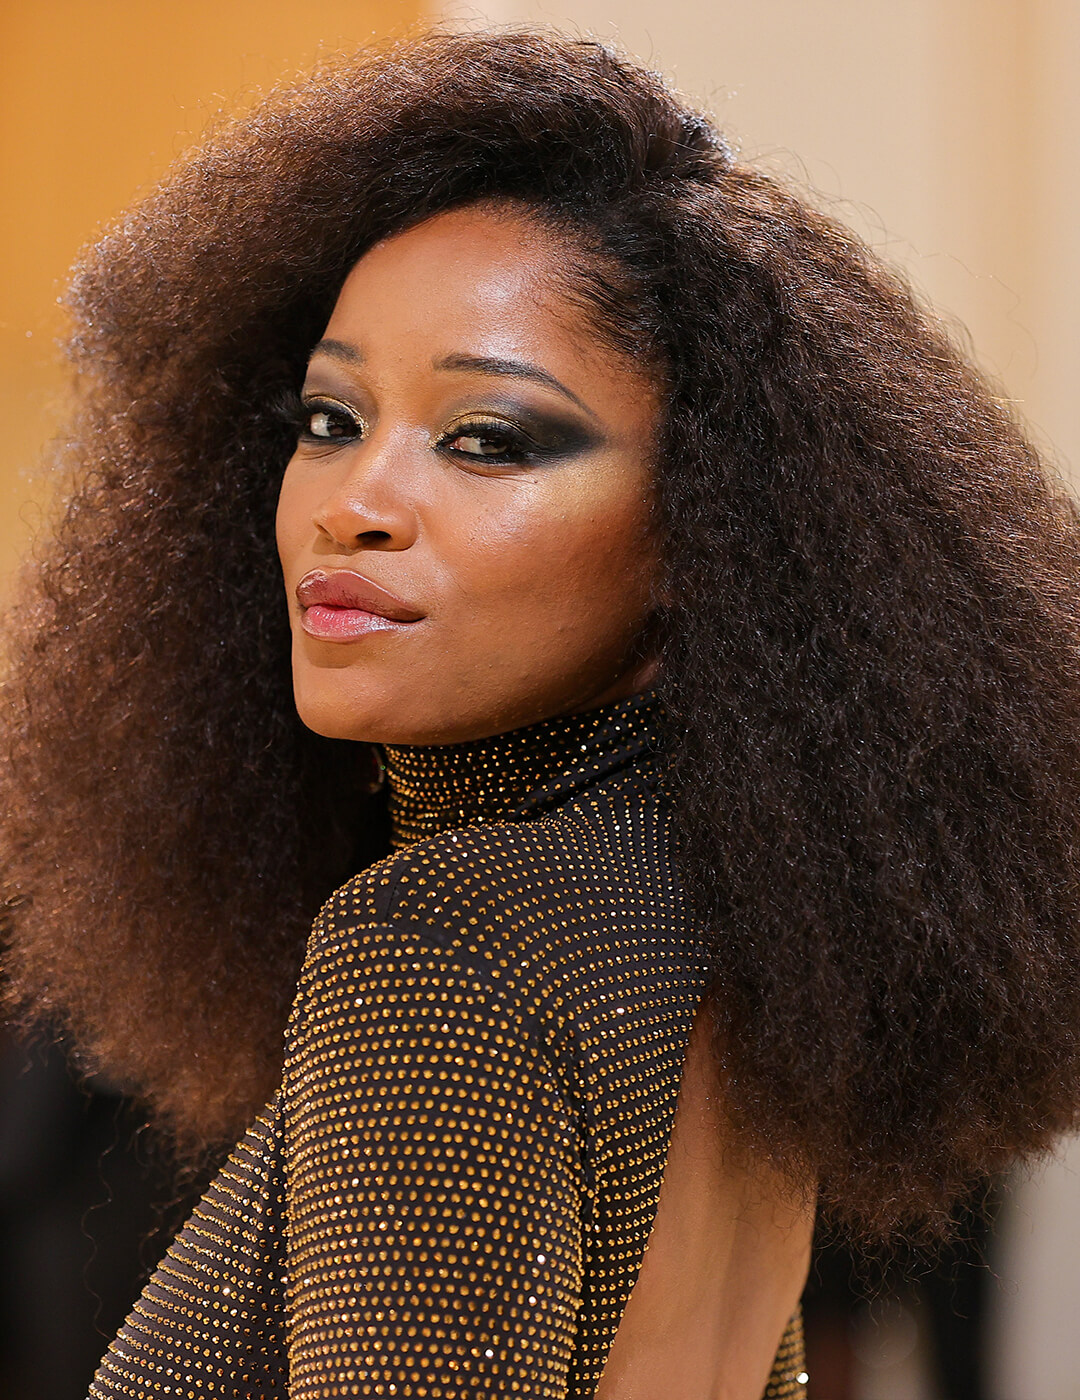 Keke Palmer rocking an afro and black and gold sequined dress